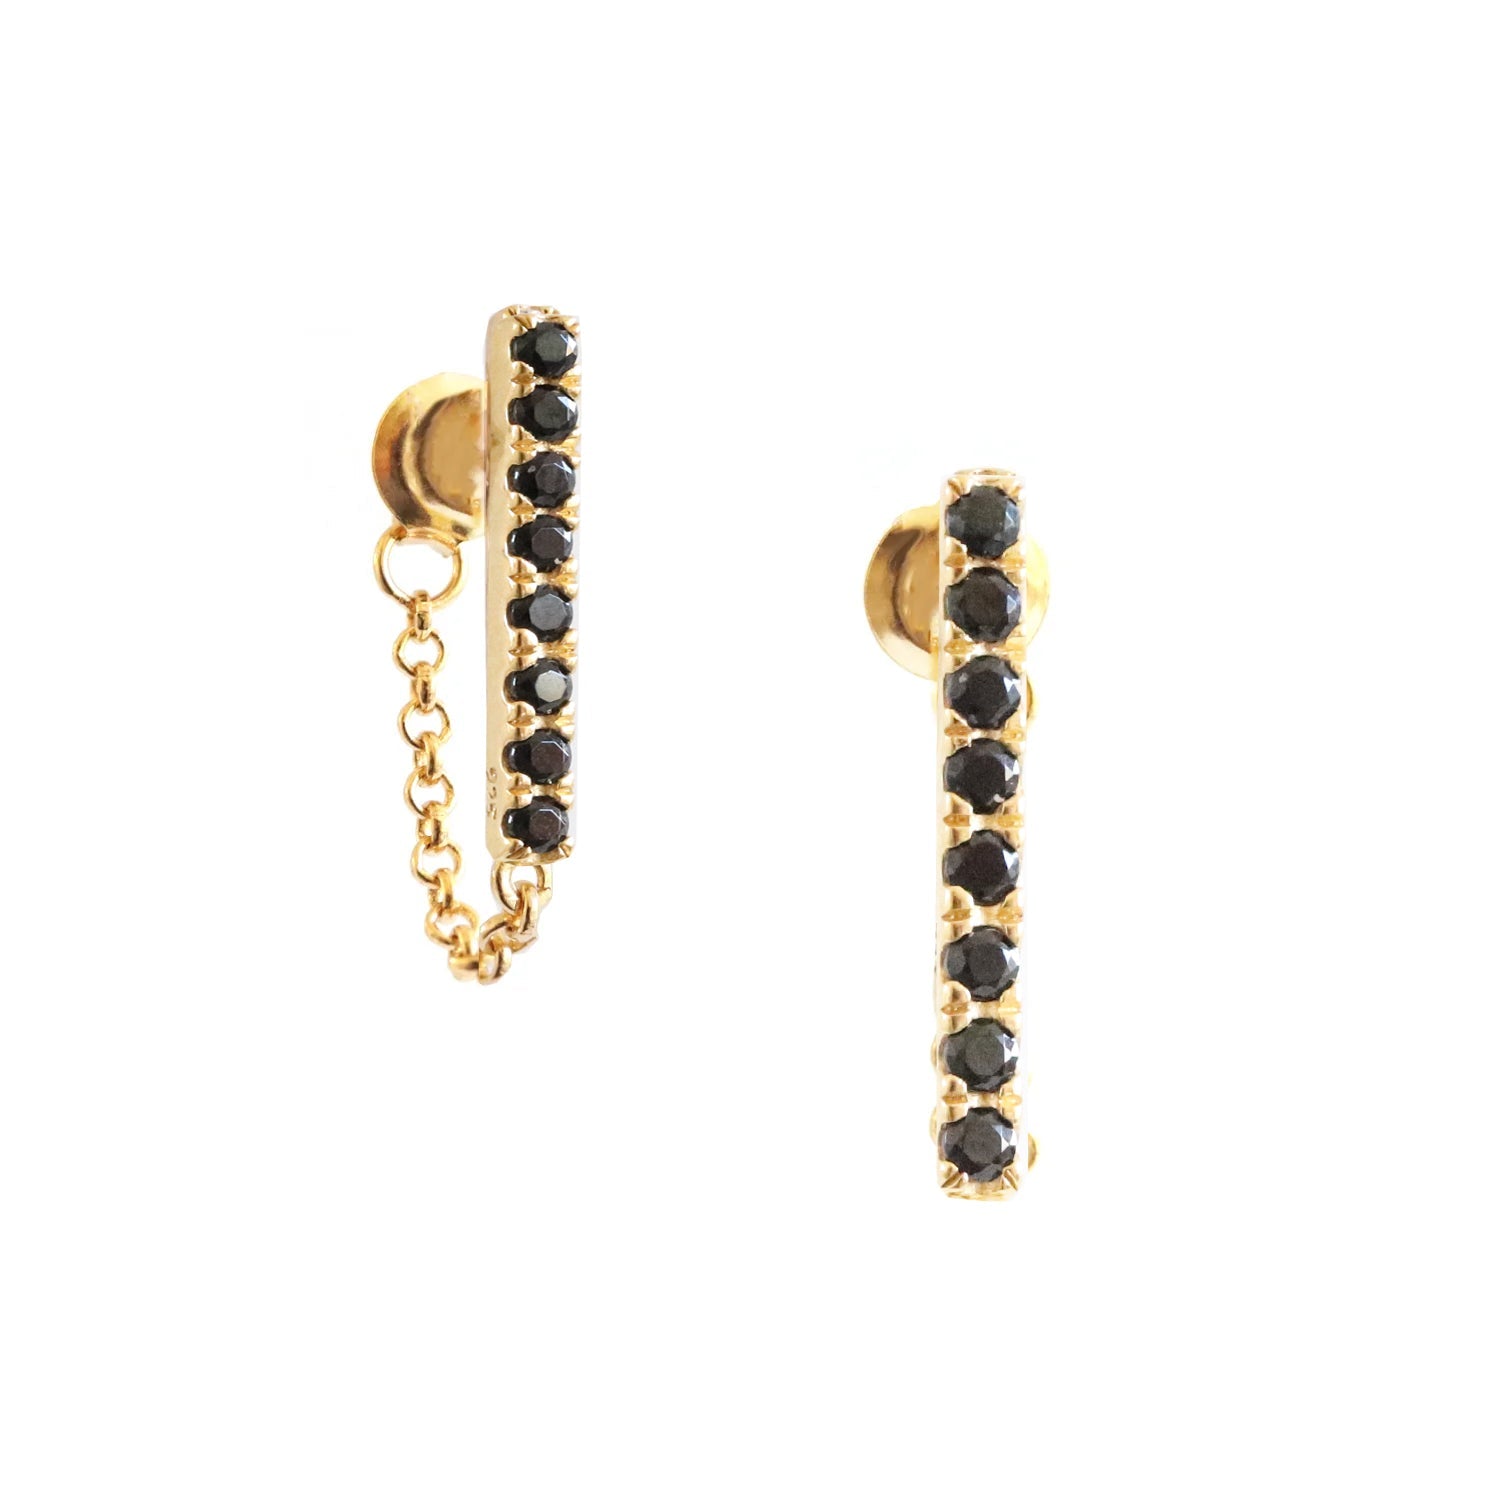 DAY 7 - LOVE BAR EARRNGS - BLACK ONYX & GOLD - SO PRETTY CARA COTTER